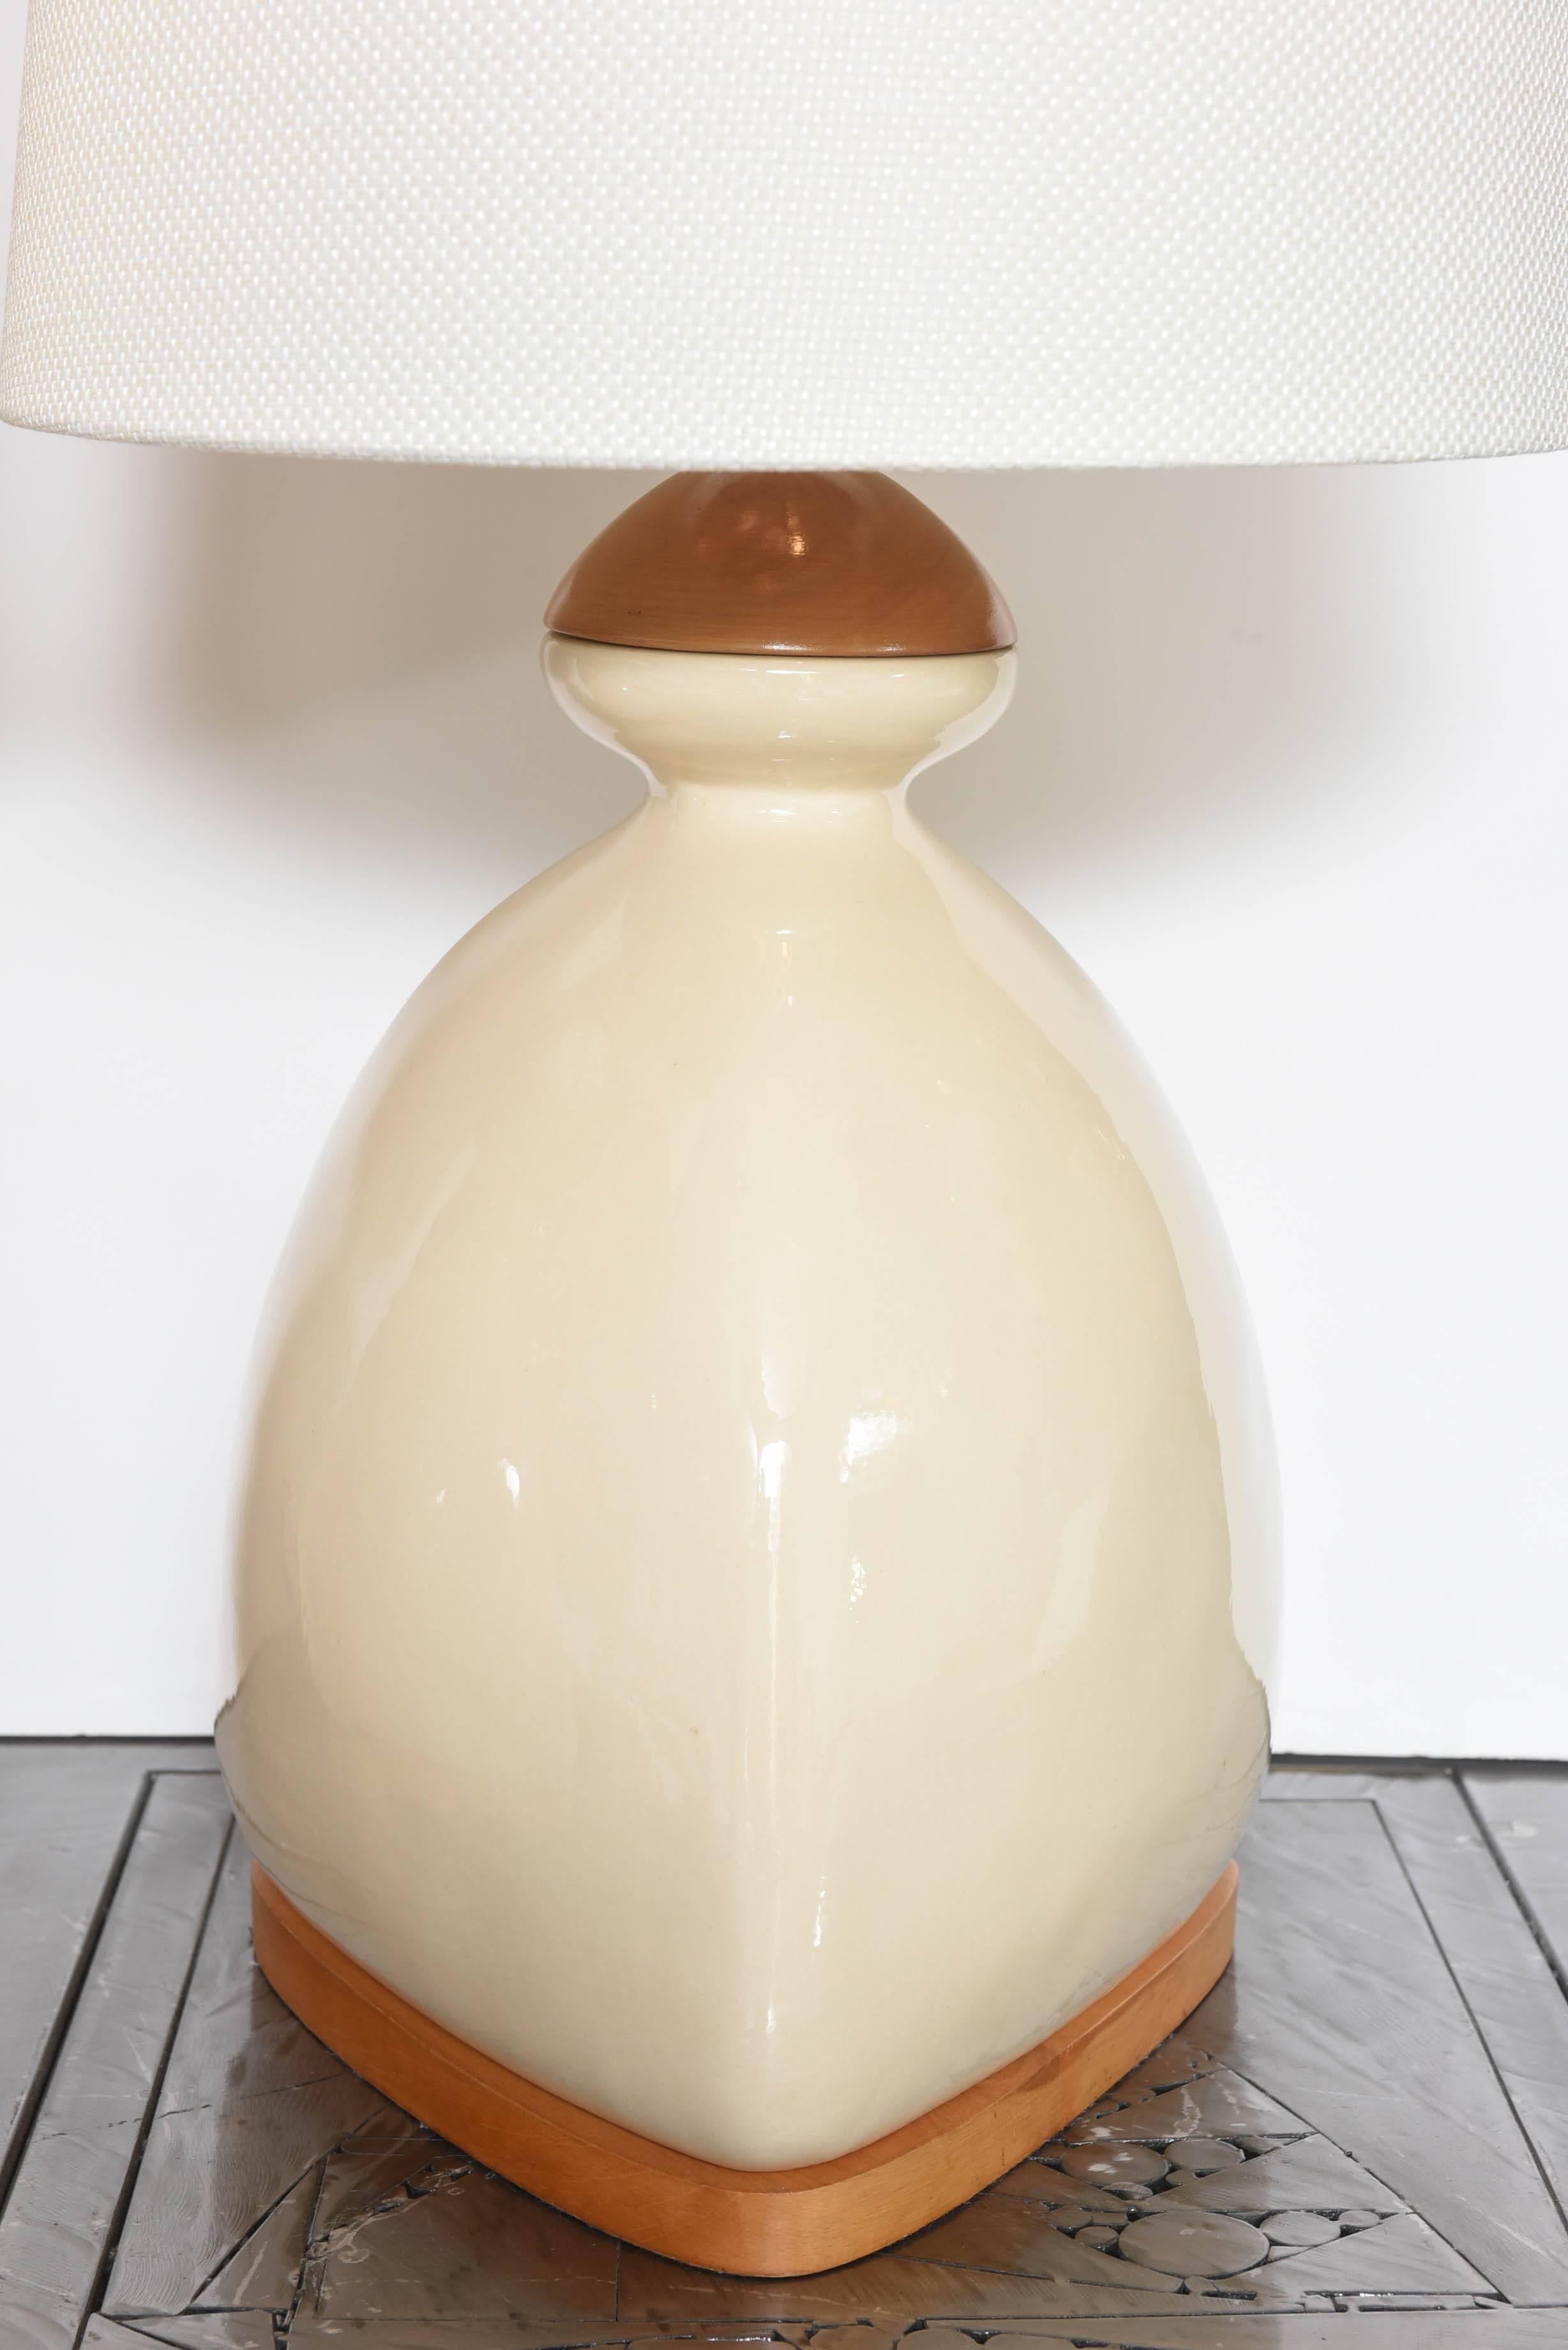 Pair of Scandinavian table lamps, beche, ceramic and wood, substantial, contemporary. Lamps can support a much large, taller and wider shade.
Shades are for display only.